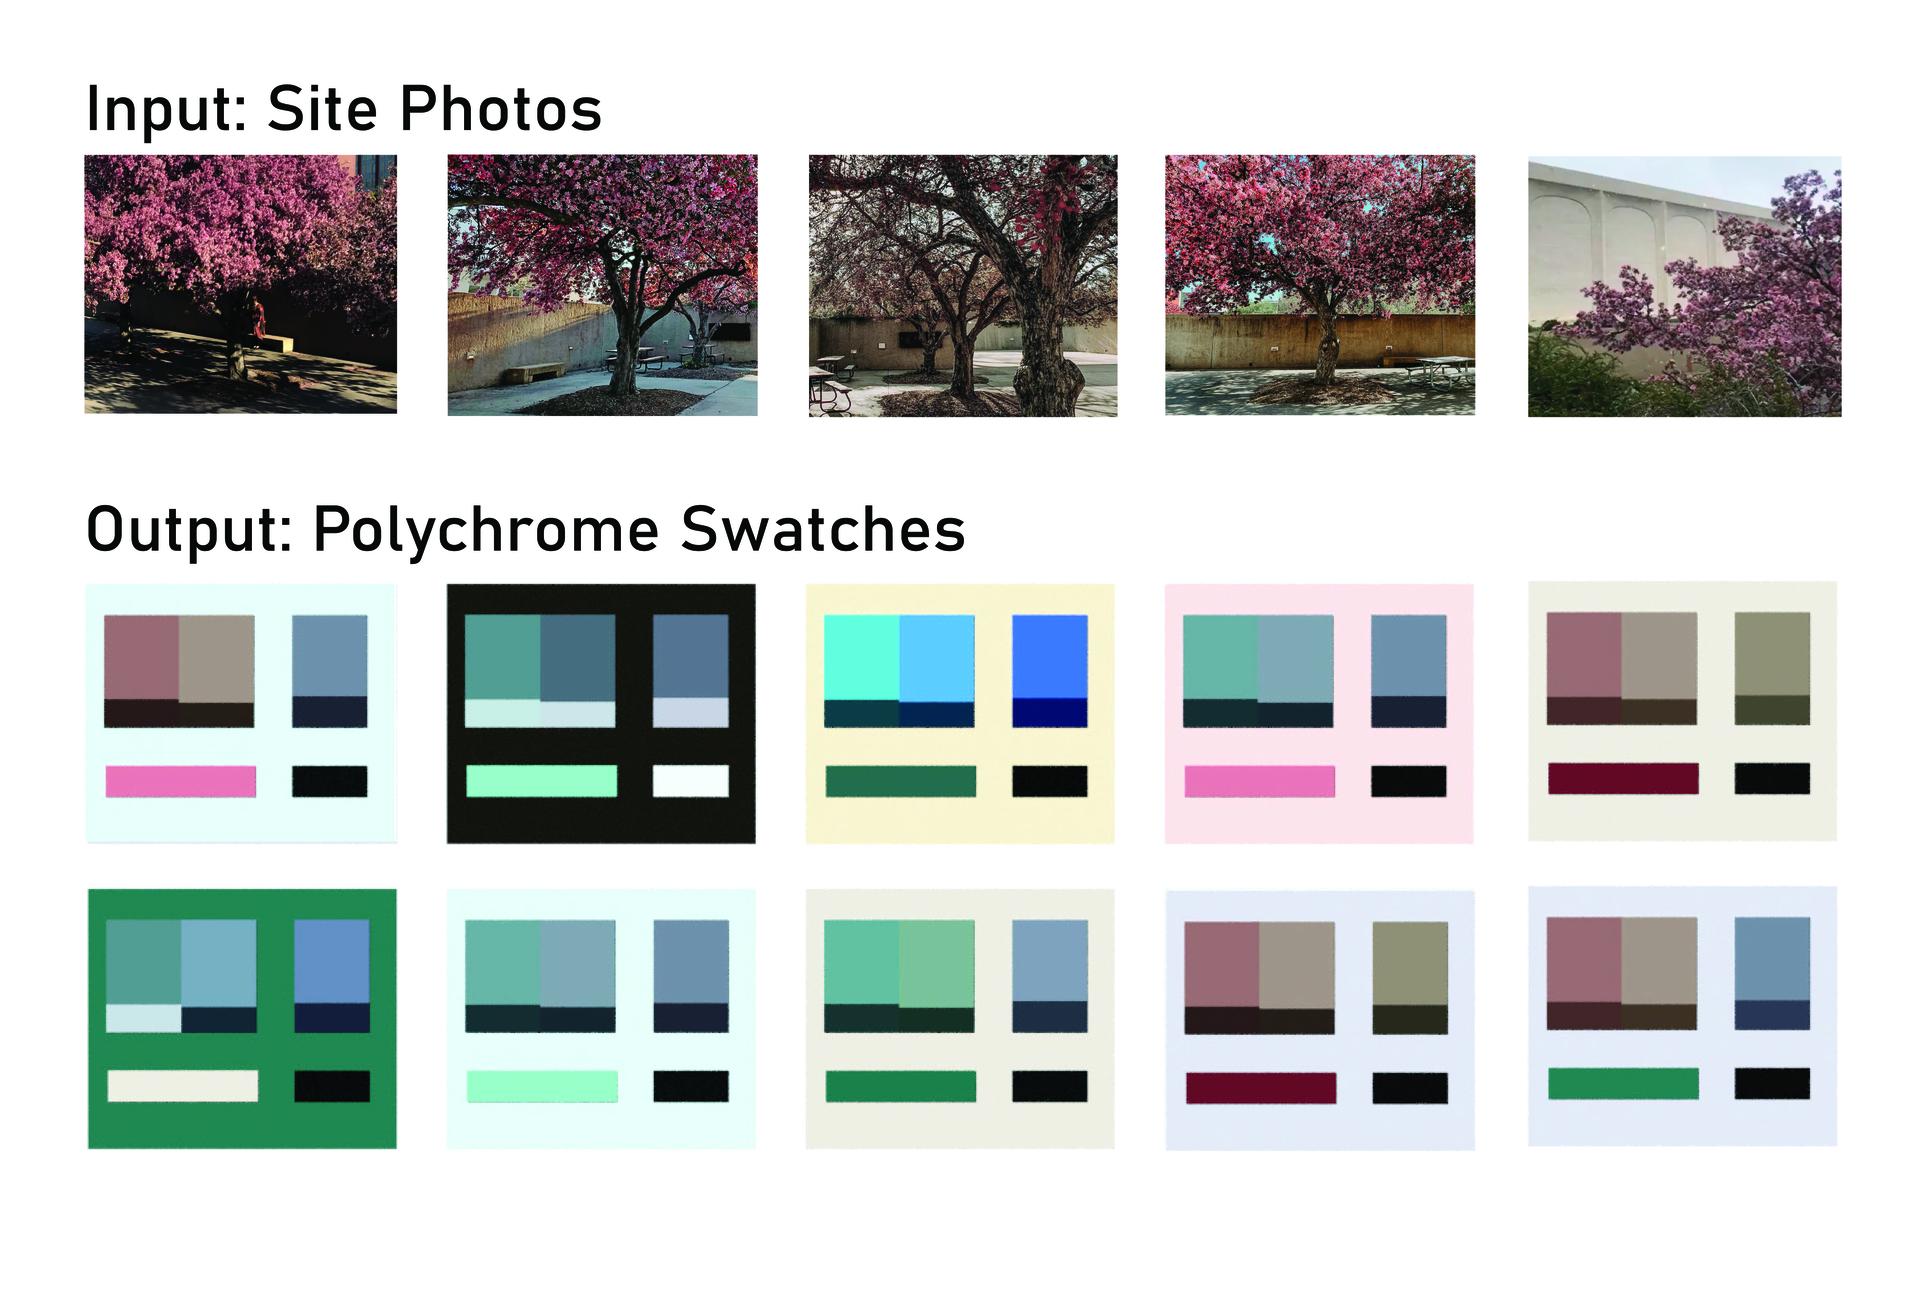 Five photos of flowering pink trees in the concrete sculpture garden next to the Sheldon Art Museum and 10 combinations of color swatches that coordinate or contrast with the input photos.